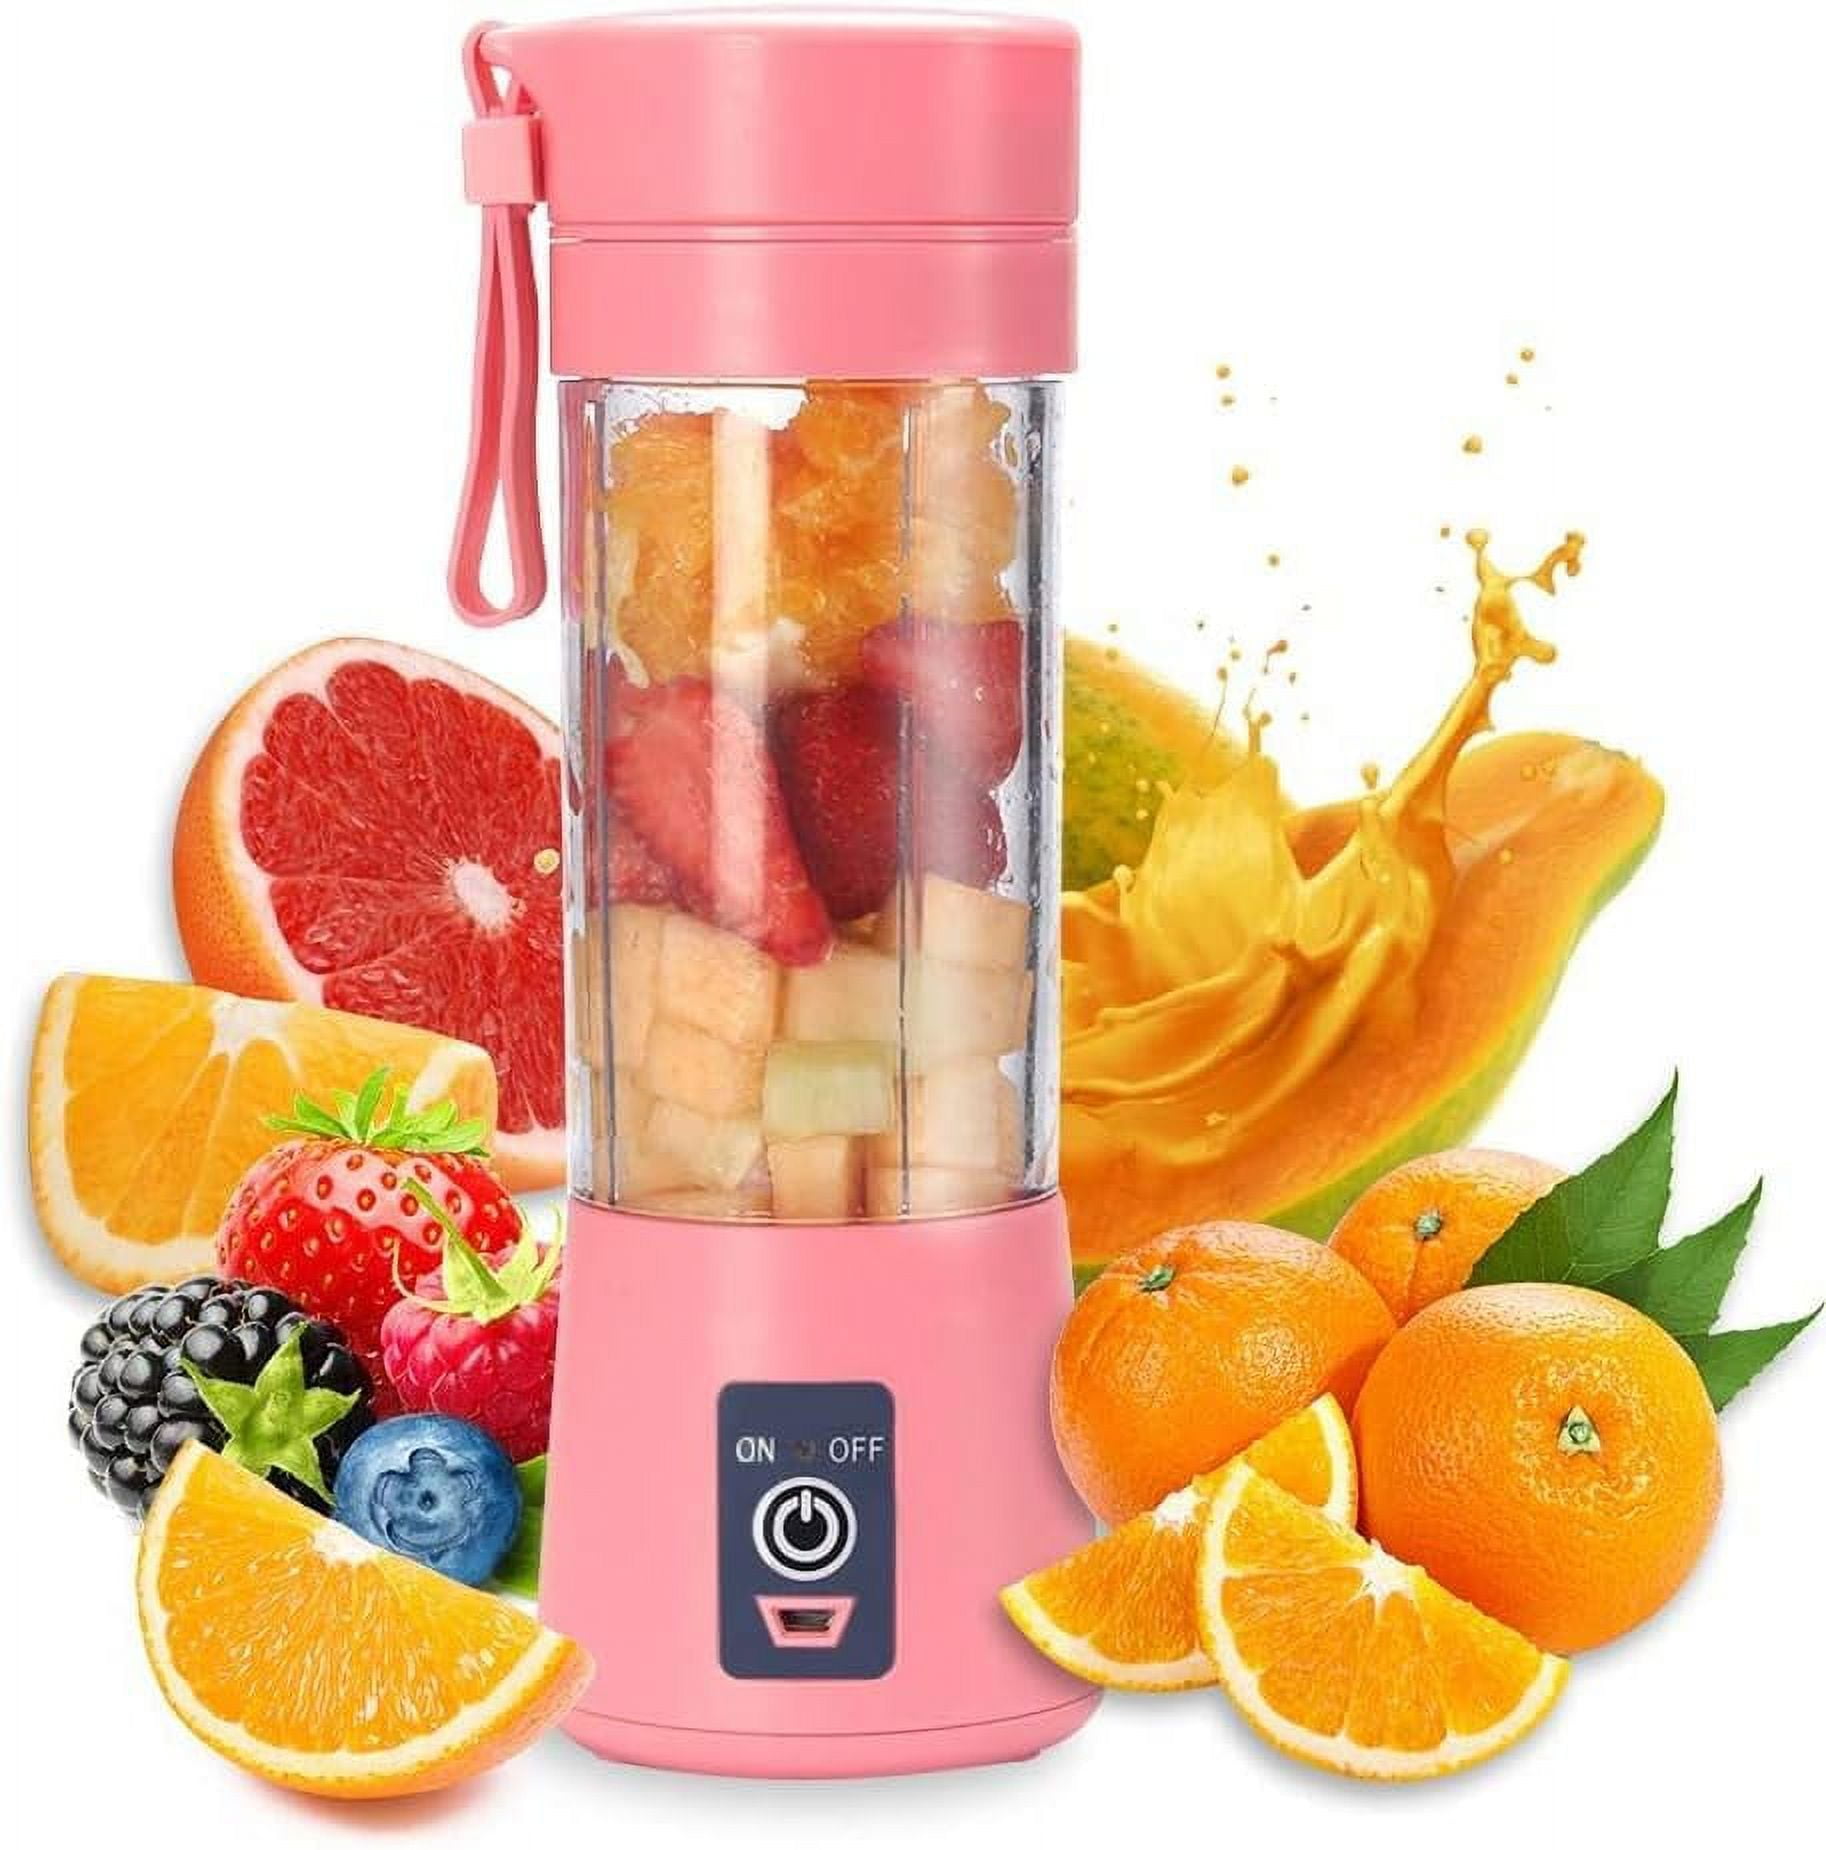 Usb Portable Juicer Cup 6-blade Juicer Usb Electric Rechargeable